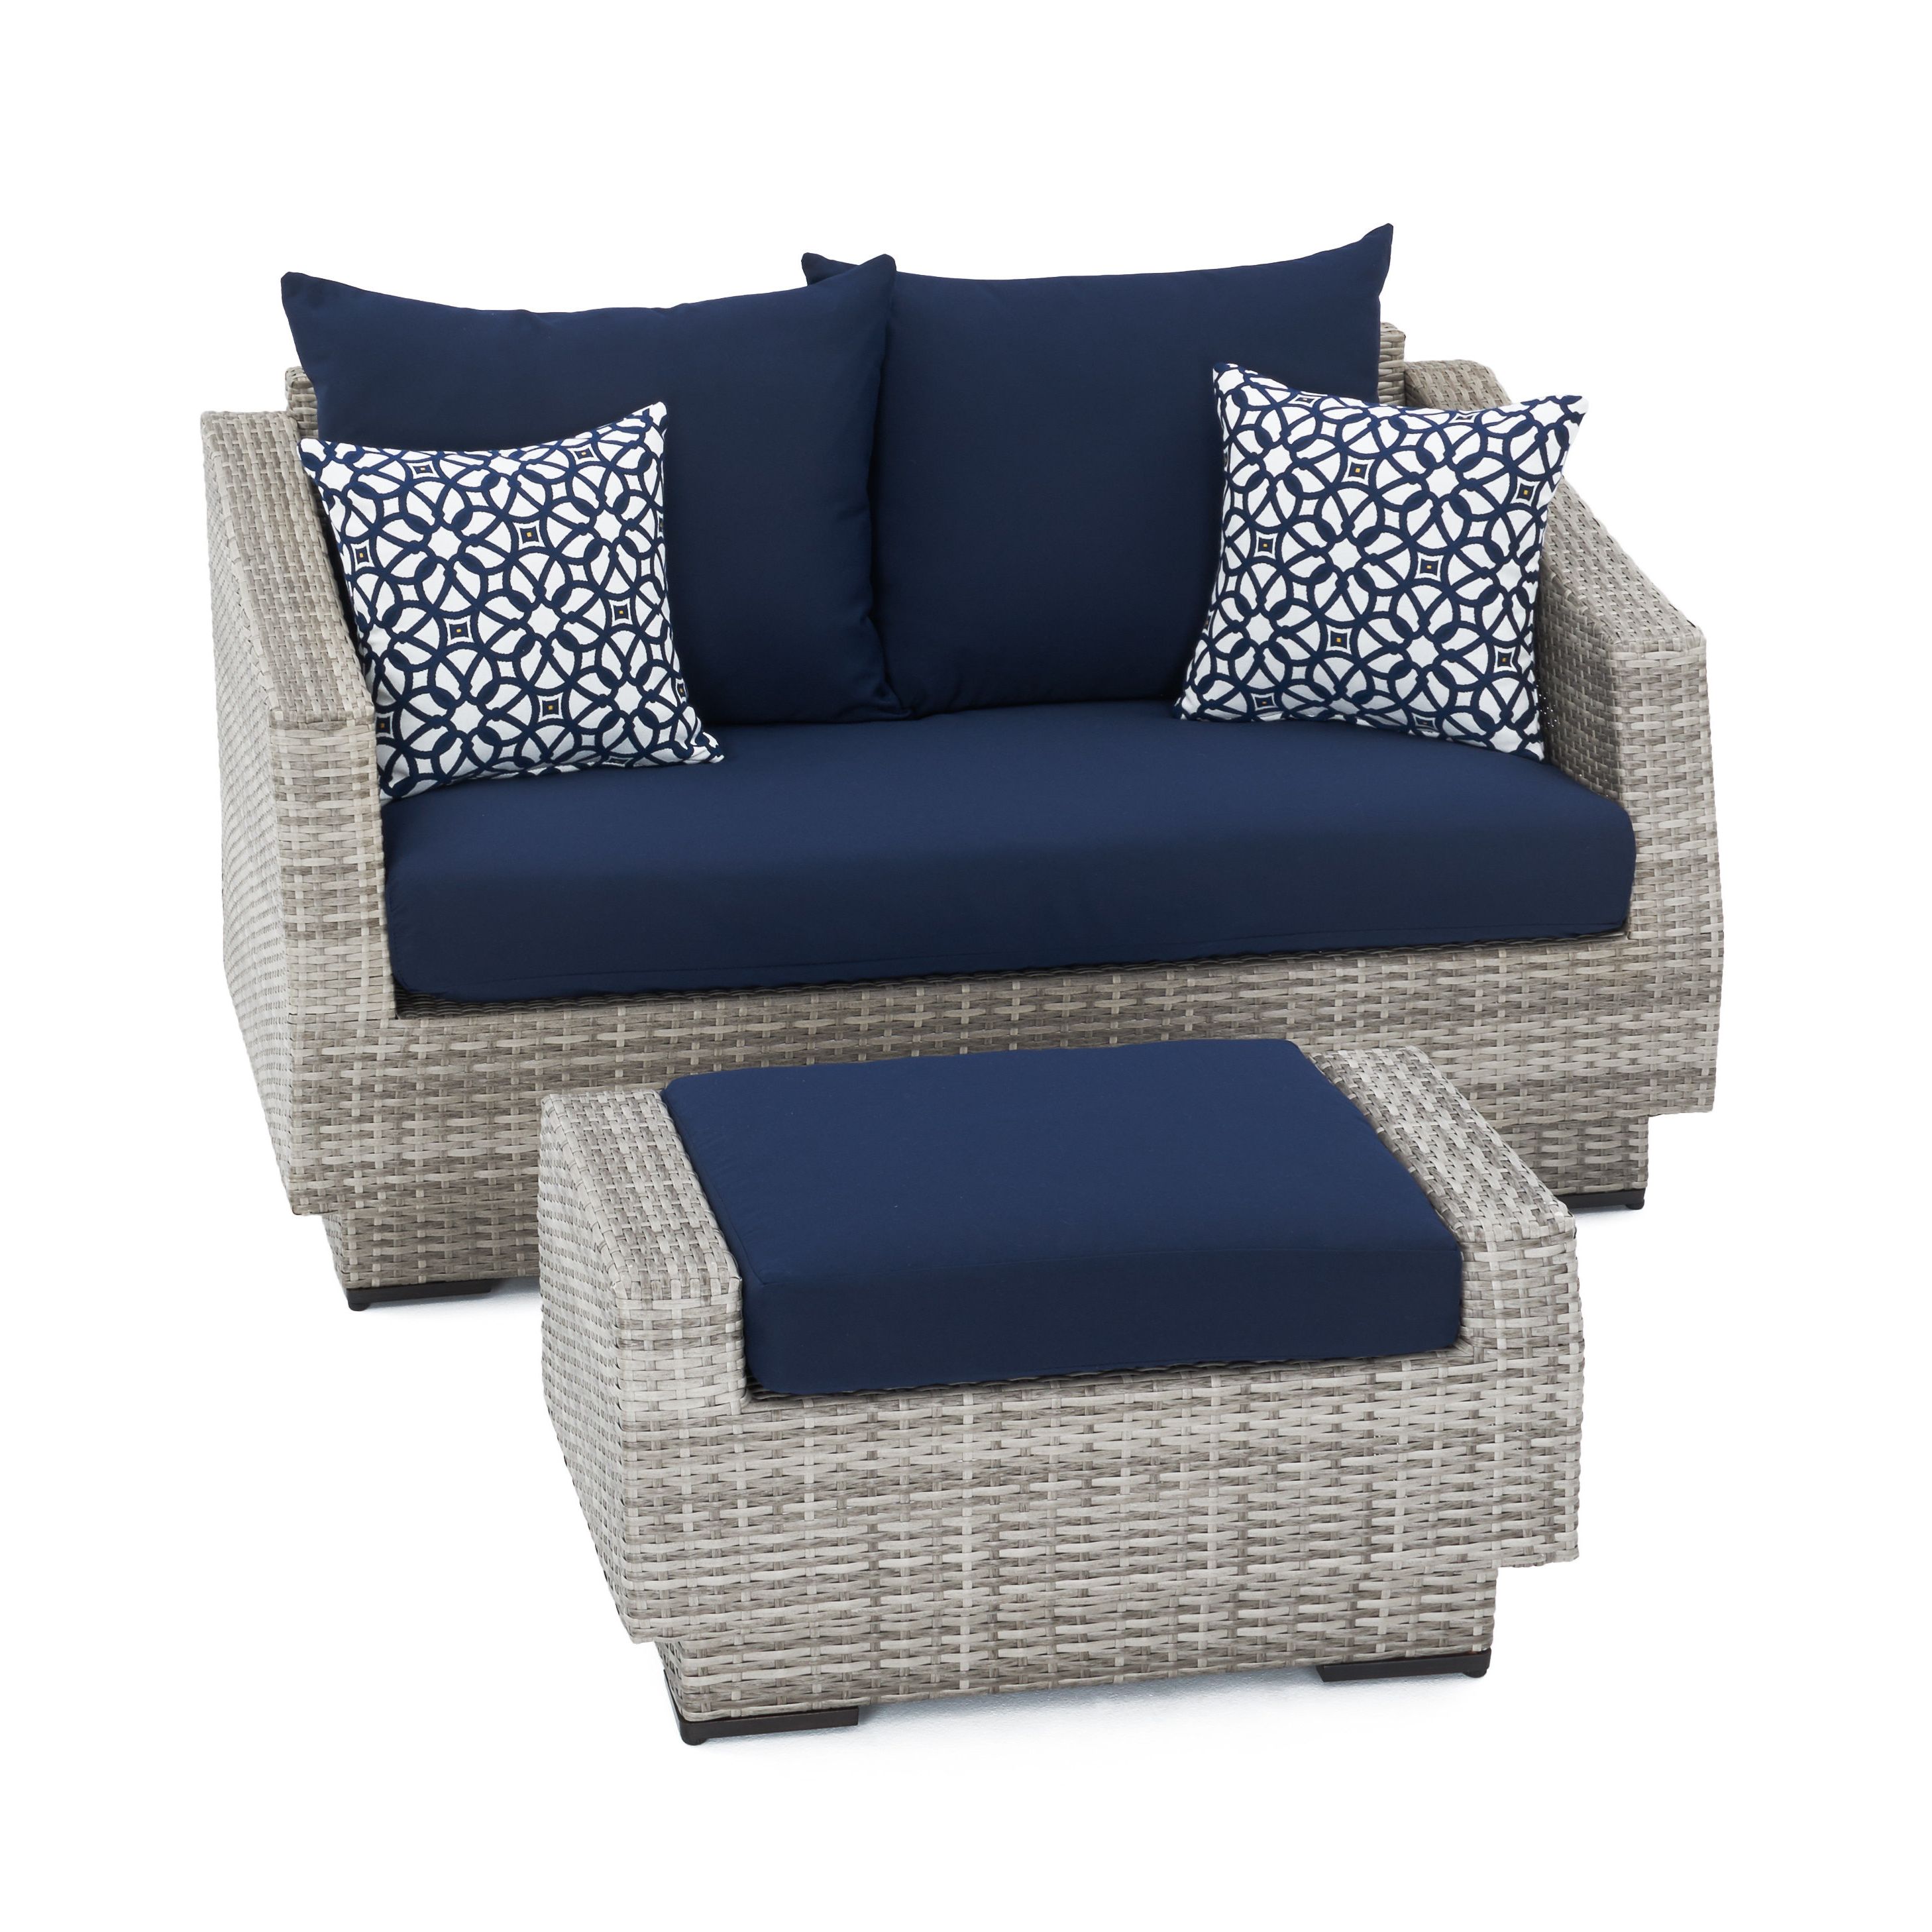 Castelli Loveseat With Cushions Within Newest Castelli Loveseats With Cushions (View 1 of 20)